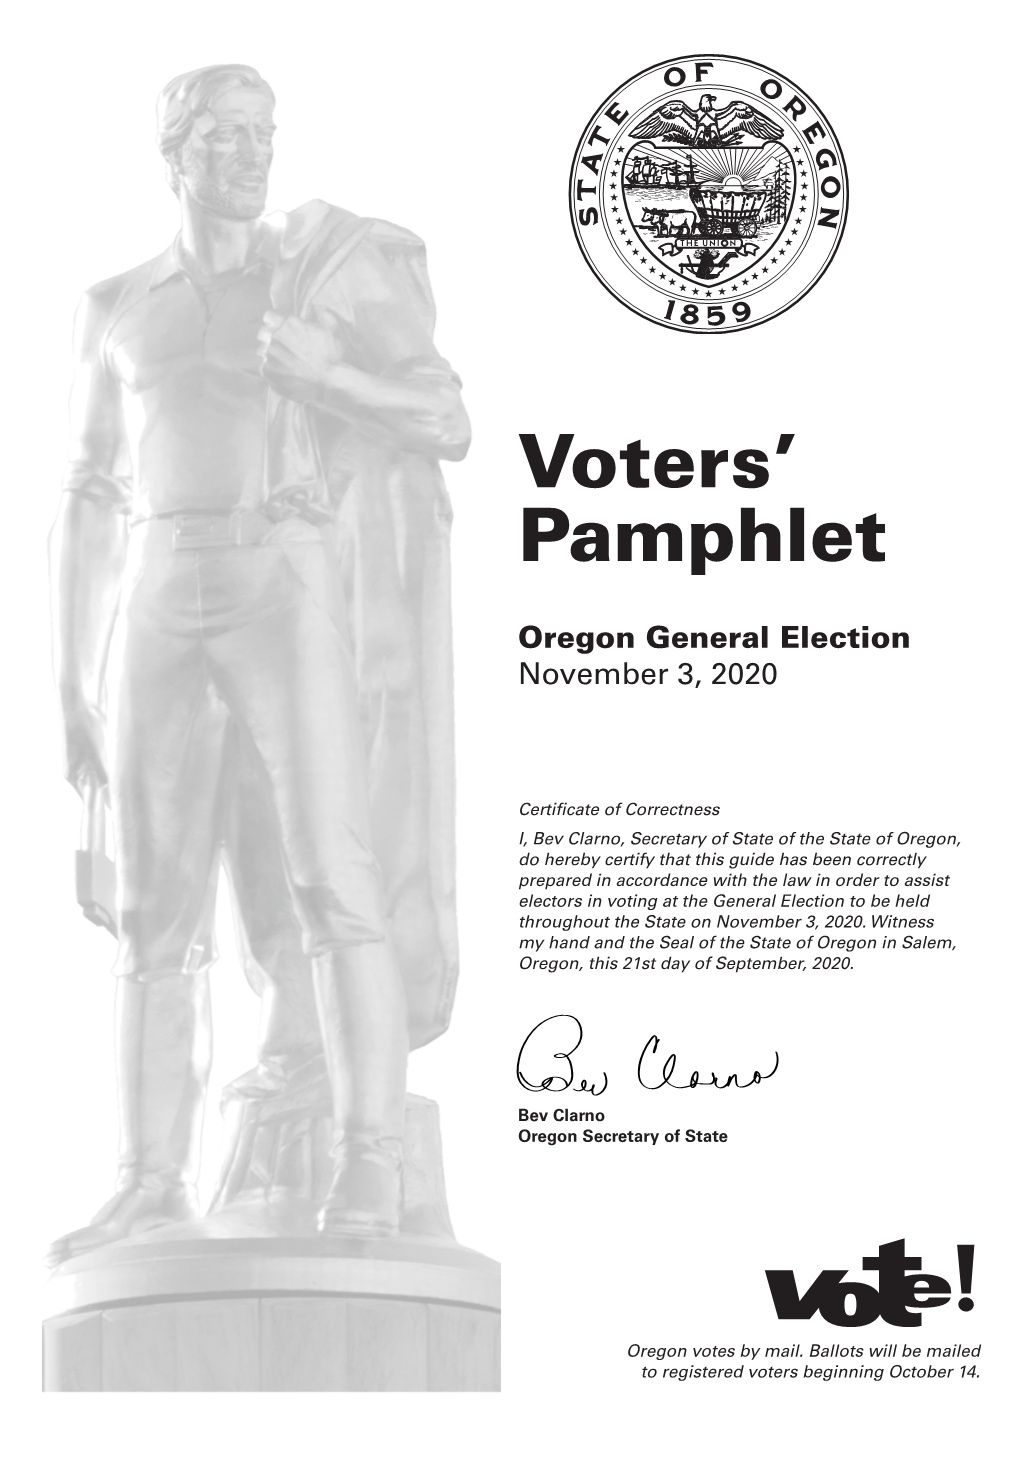 Voters' Pamphlet General Election 2020 for Linn County